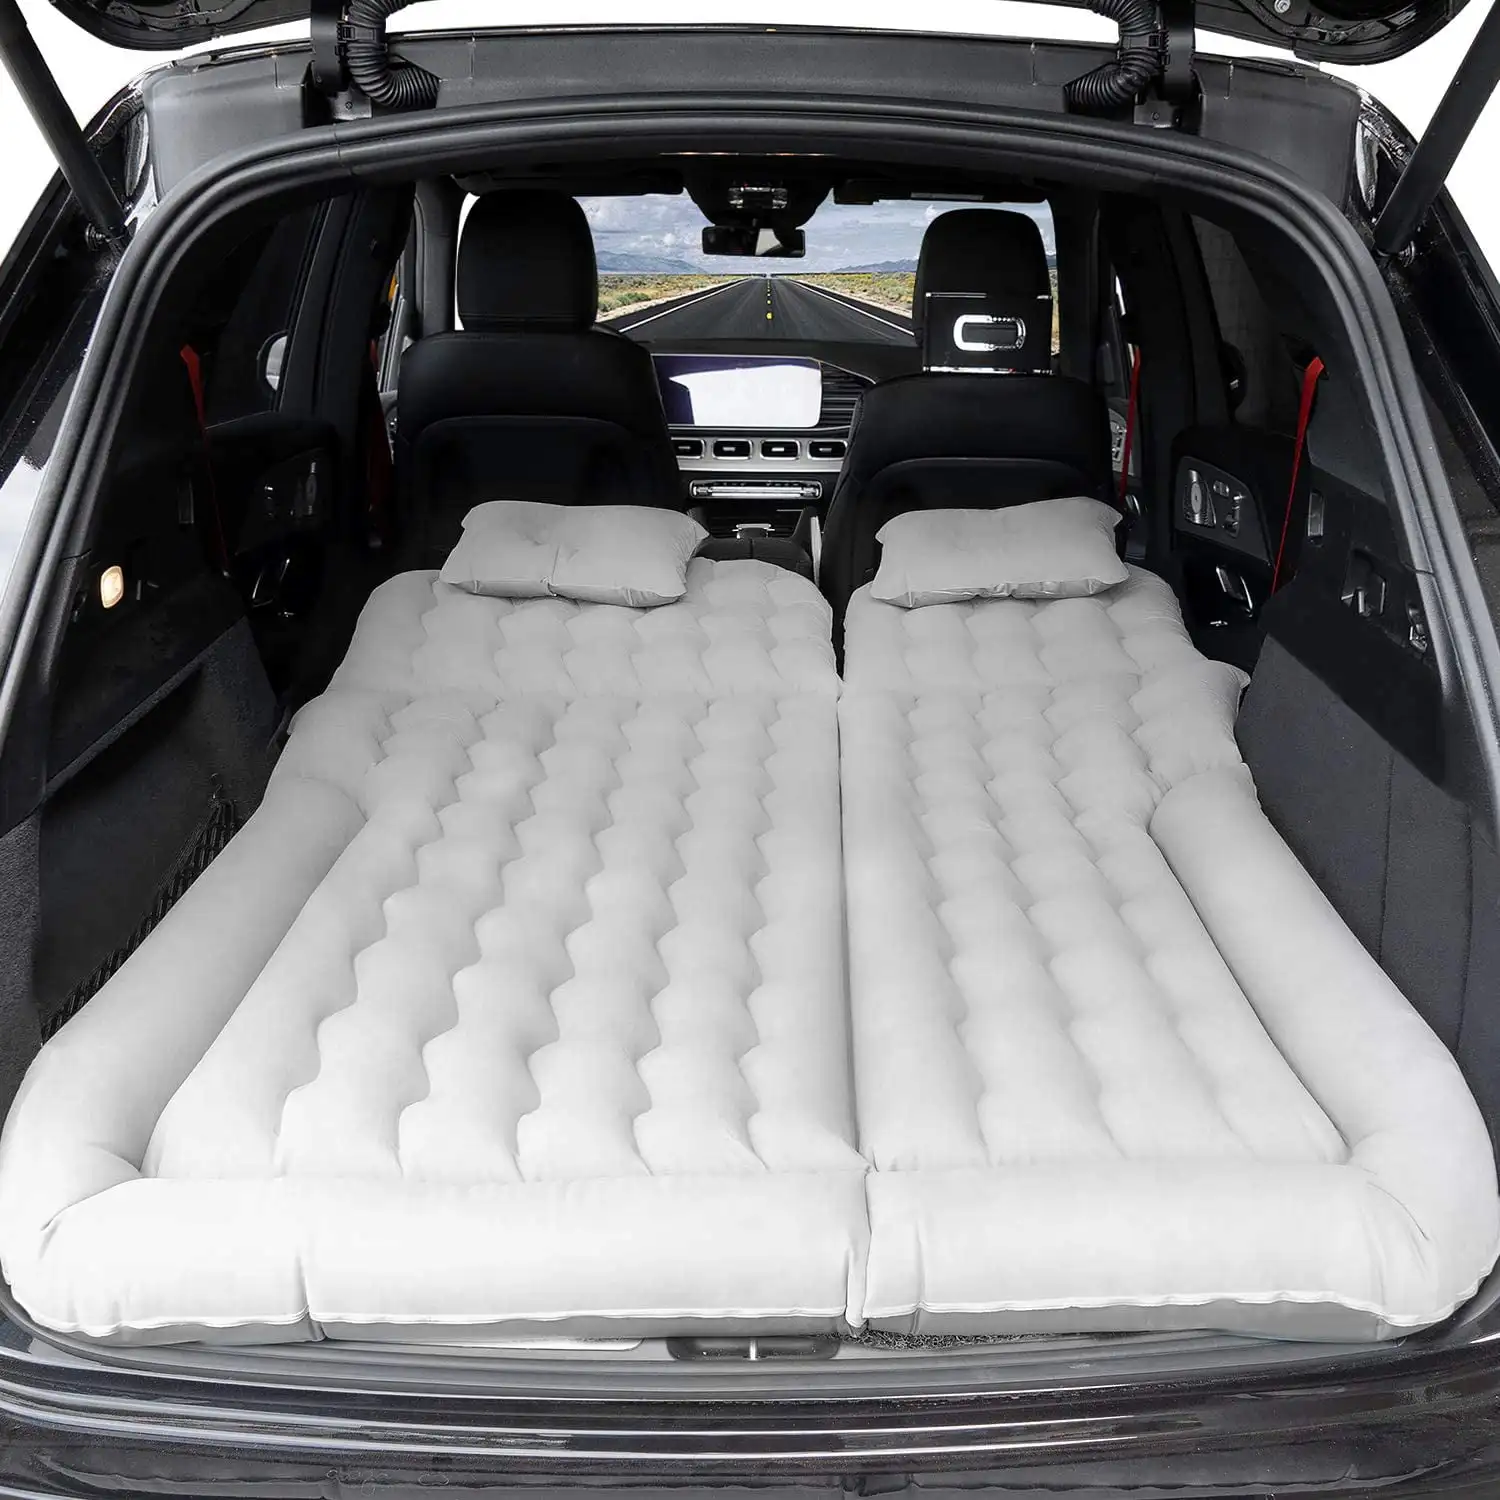 SUV Air Mattress, Inflatable Car Bed with Electric  and Pillow, Flocking Surface, Camping Sleeping Pad for Travel SUV （gray）